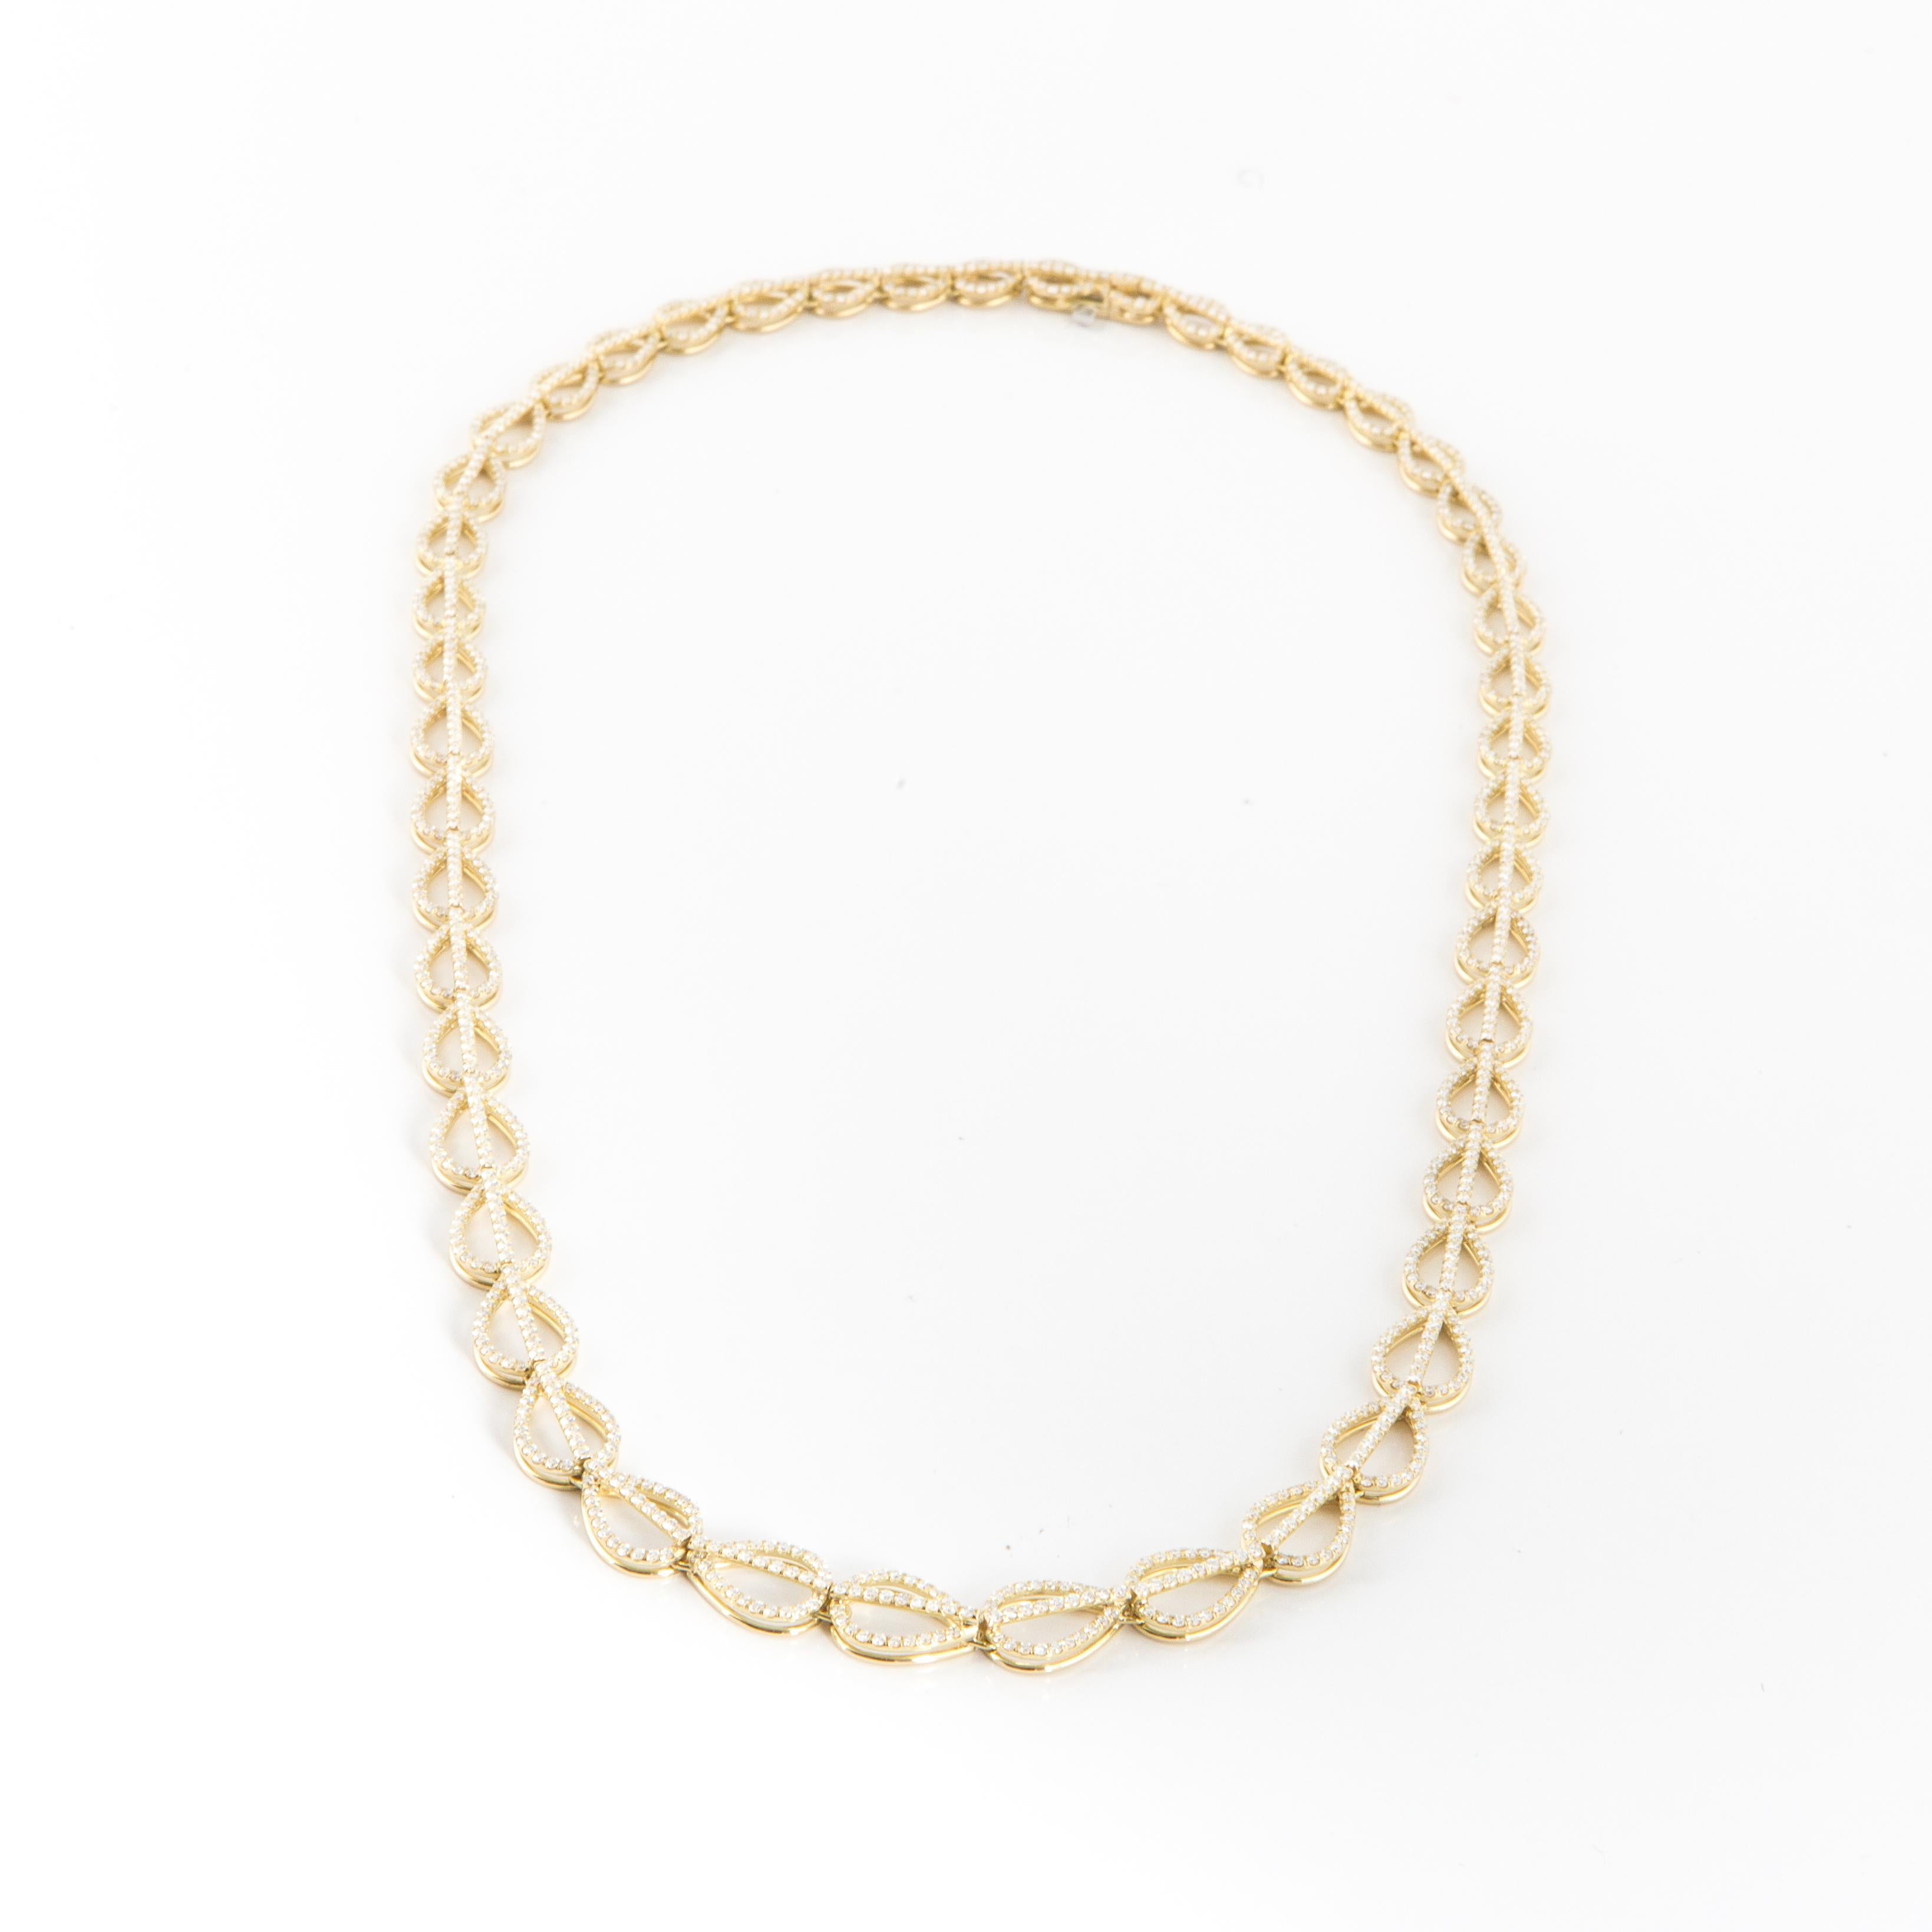 Contemporary Teardrop Link Necklace with Diamonds in 18 Karat Yellow Gold